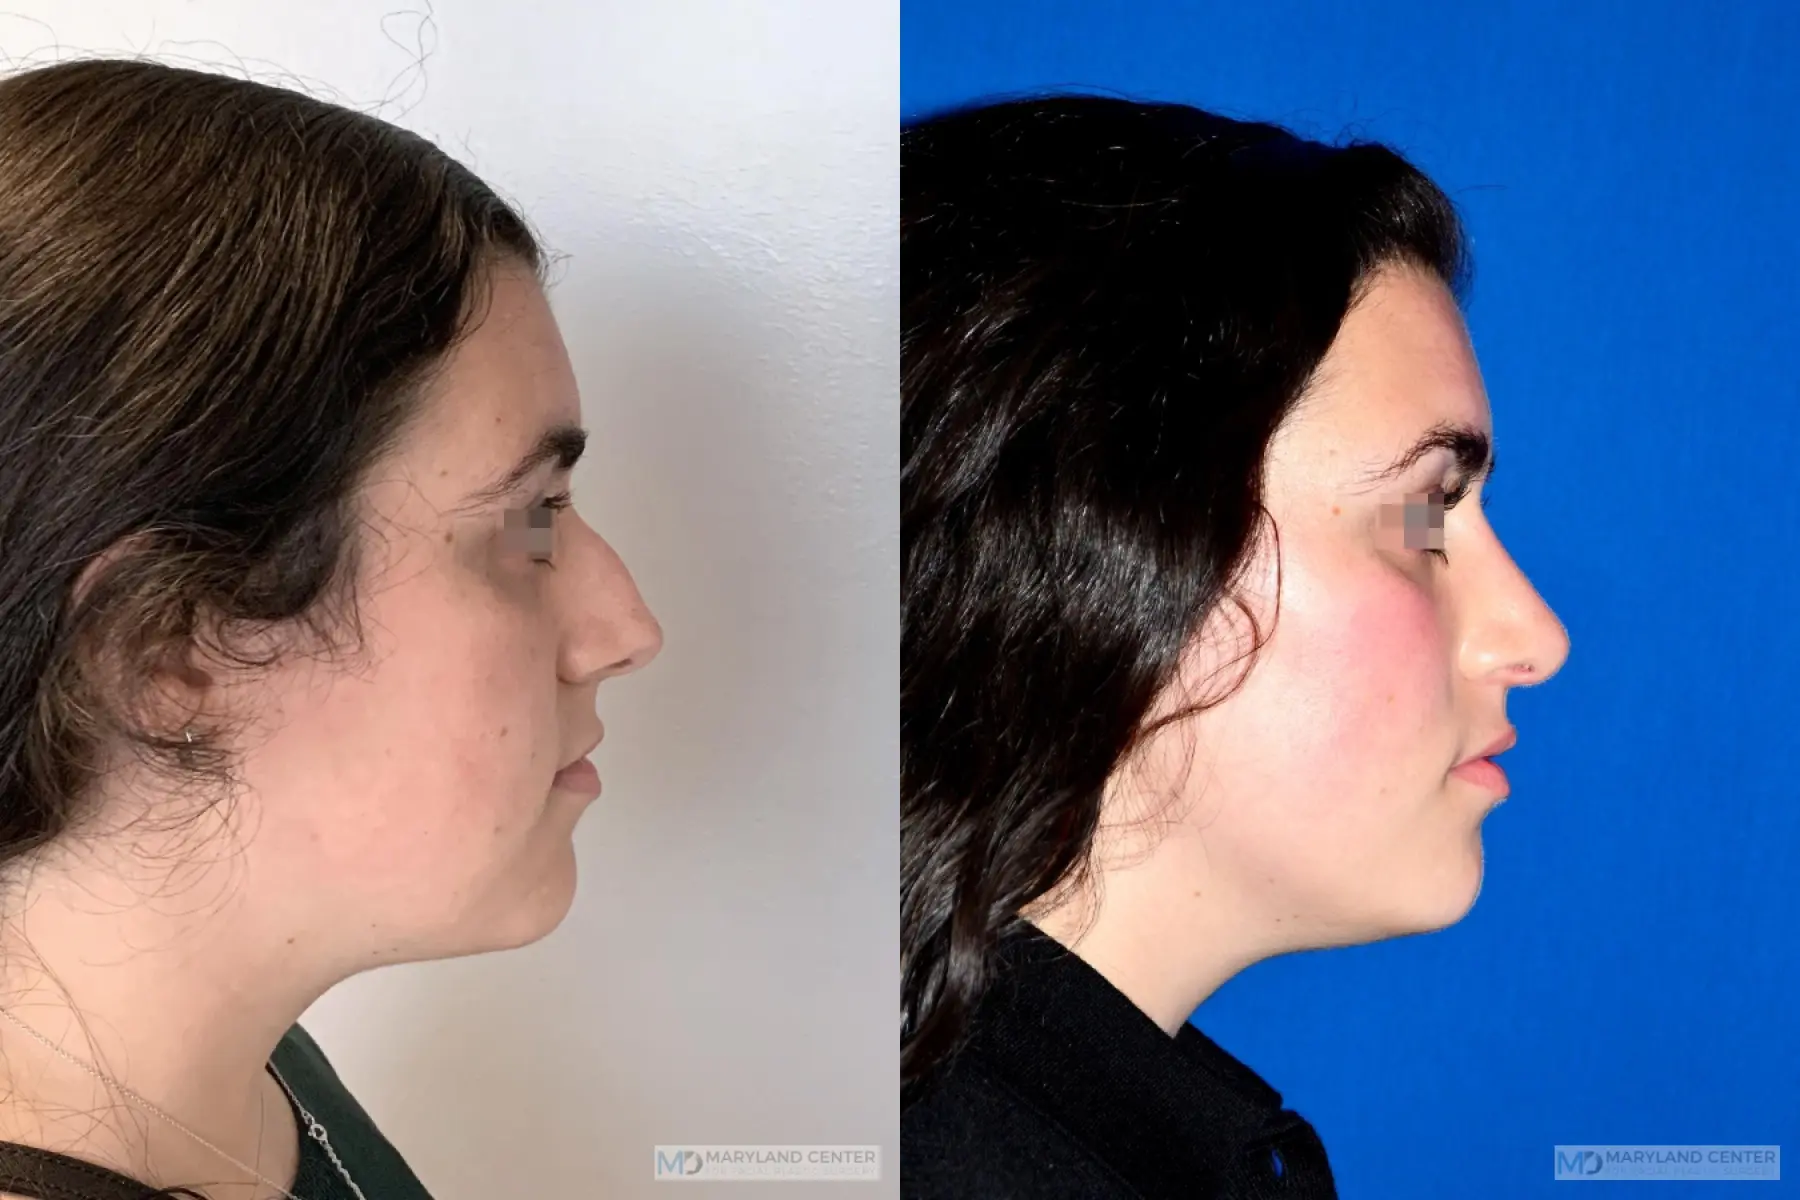 Rhinoplasty: Patient 3 - Before and After 2